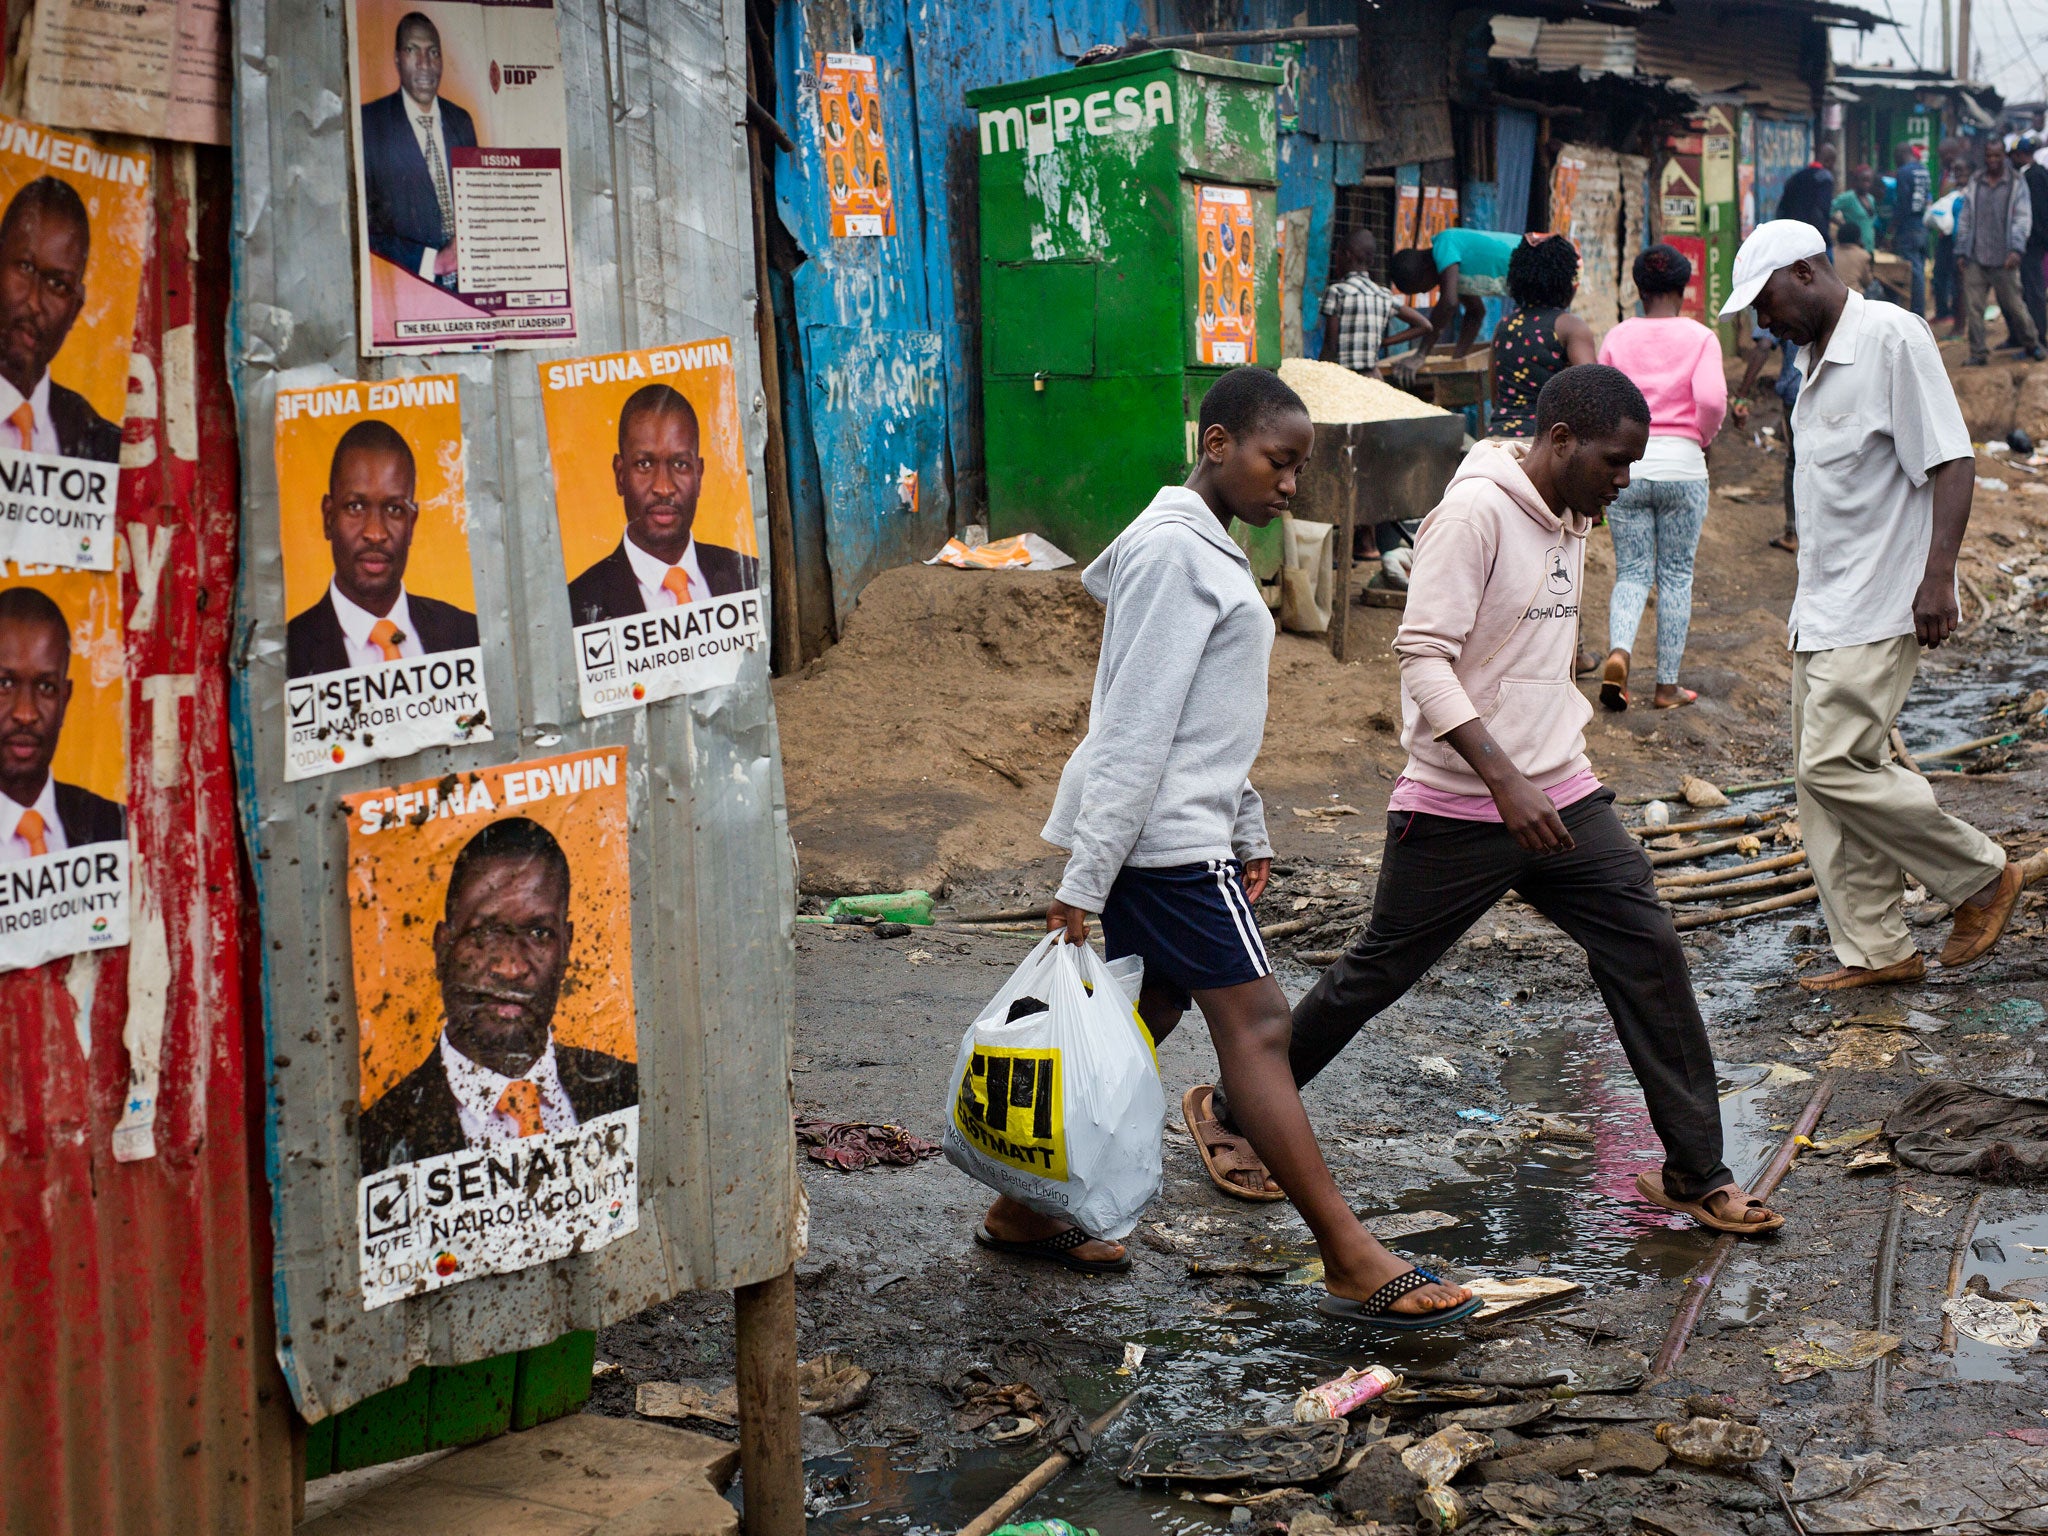 Kenyans walk past election posters in Nairobi's Kibera slum; rising living costs and inadequate healthcare are among the issues facing the country